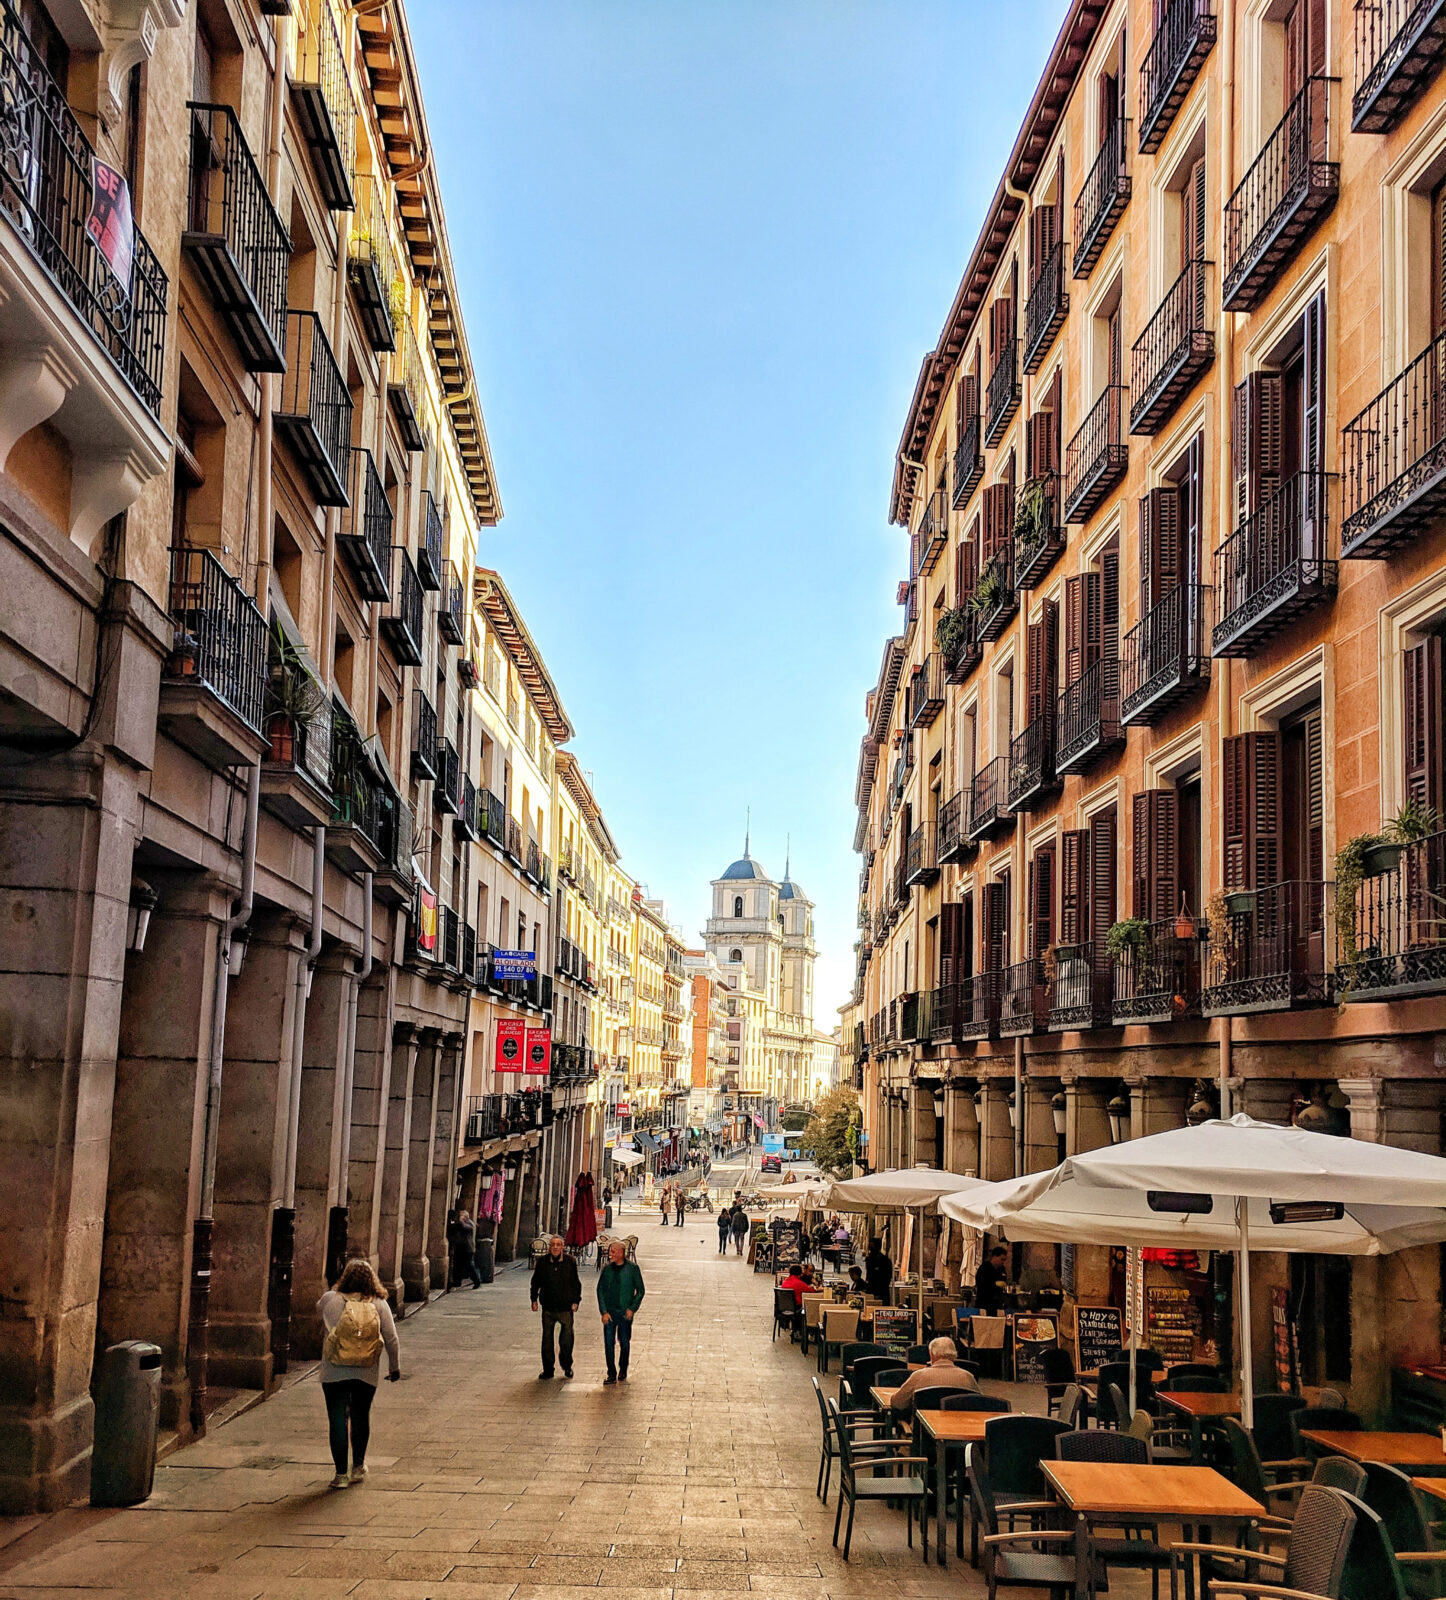 street in old mardrid with shops and buildings